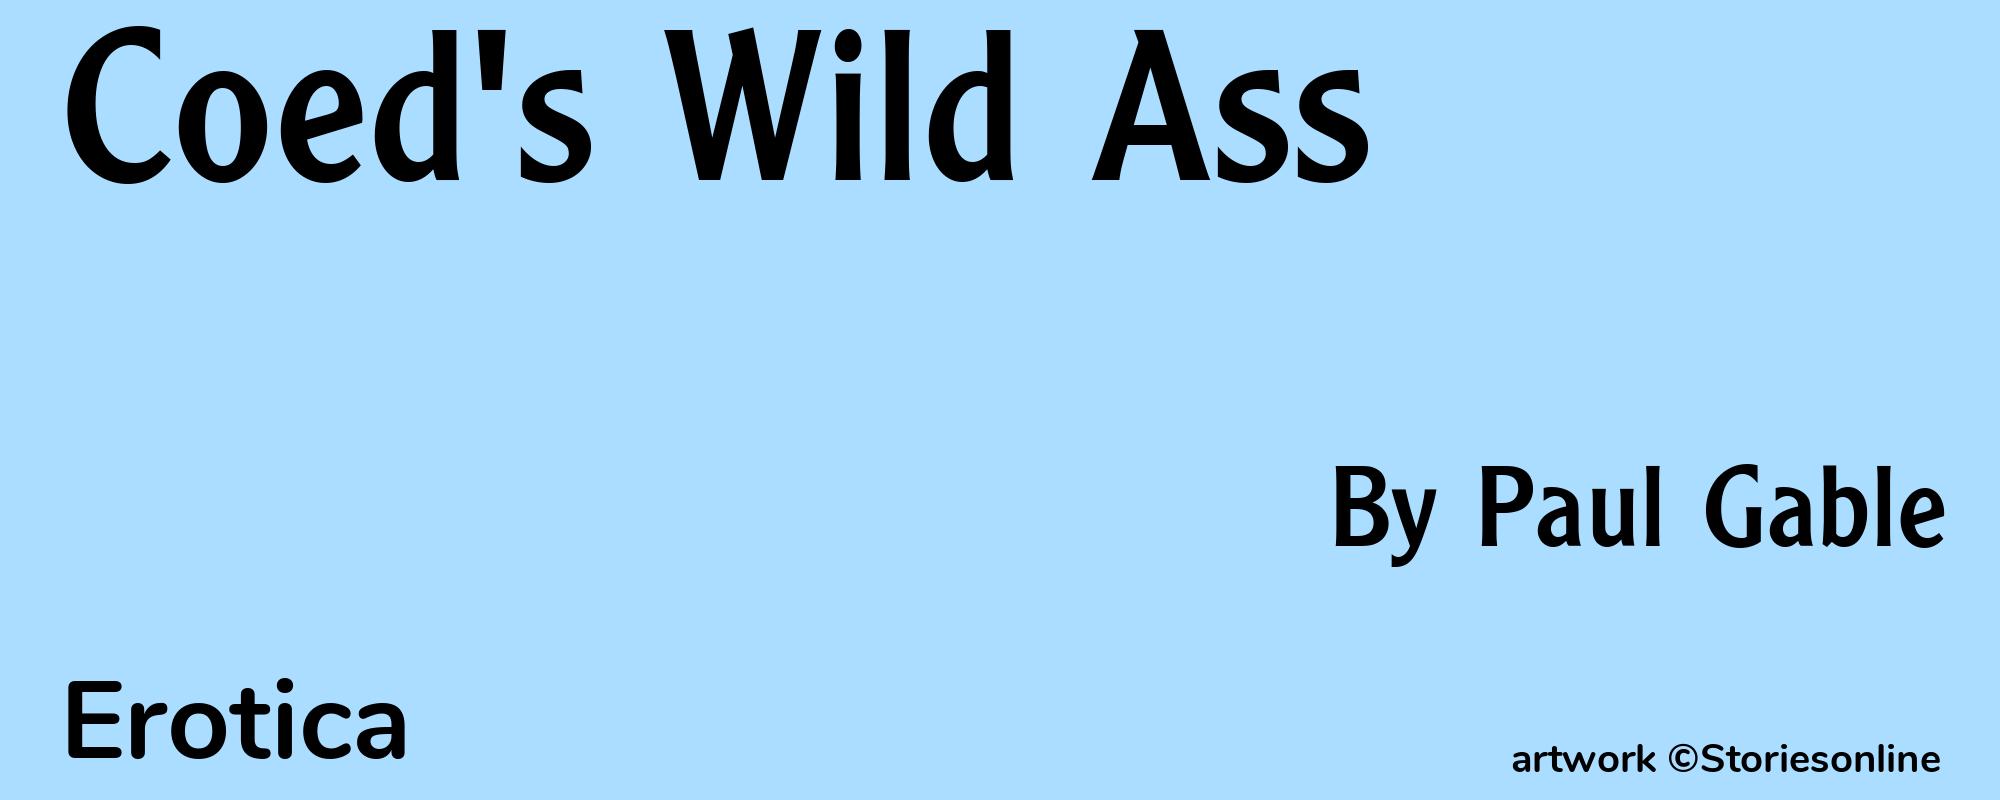 Coed's Wild Ass - Cover